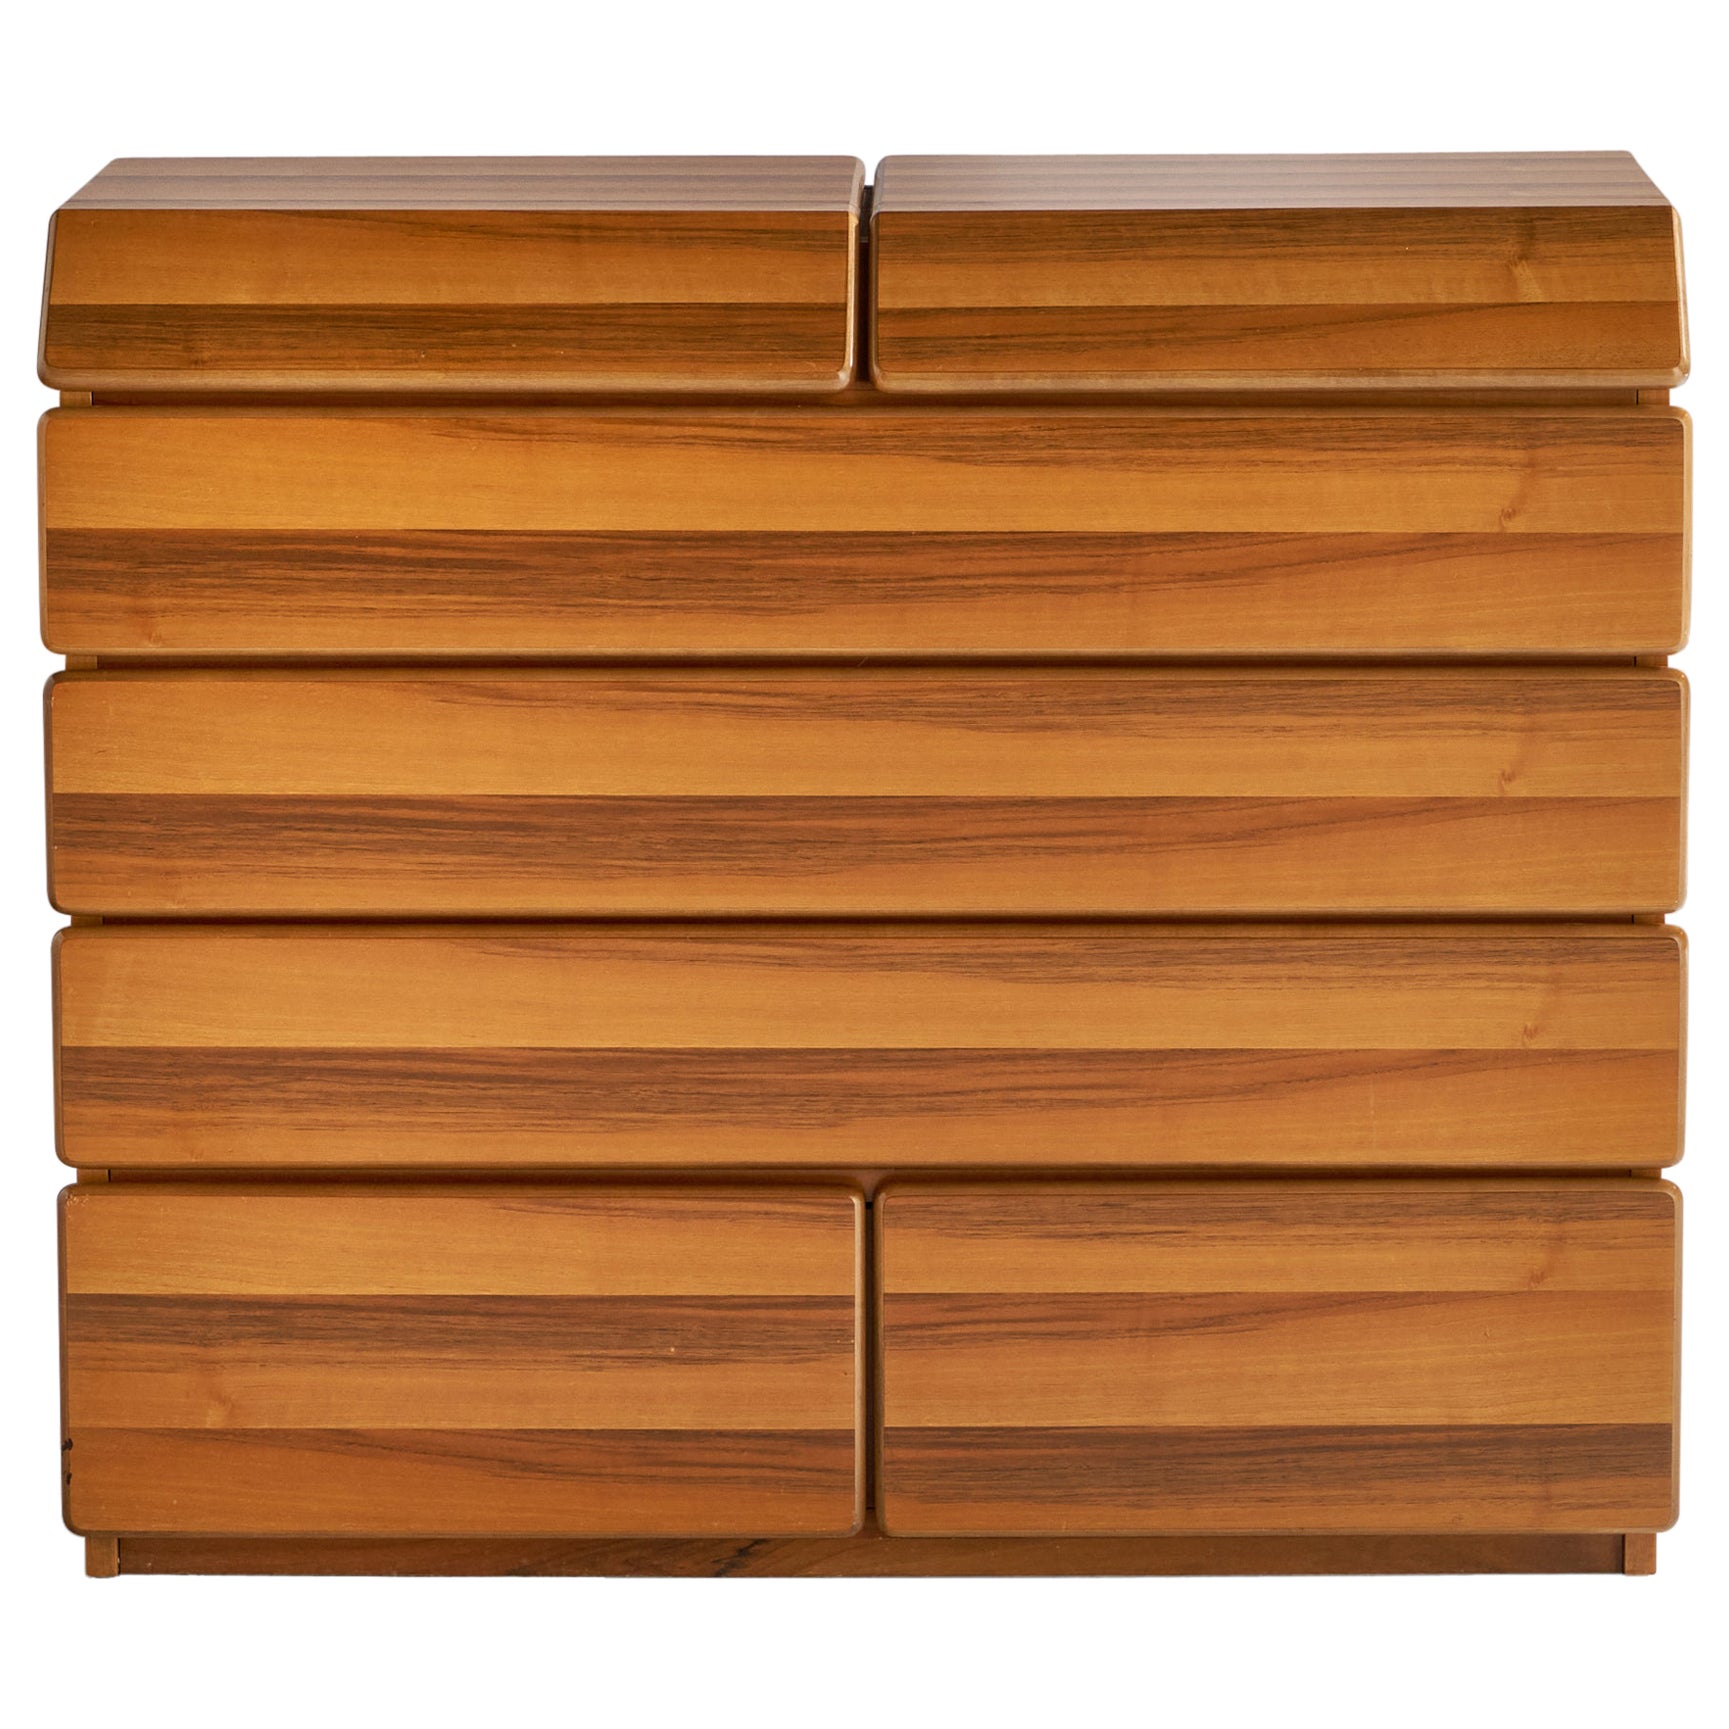 Mobilgirgi, Chest of Drawers, Spalting Wood, Italy, 1970s For Sale